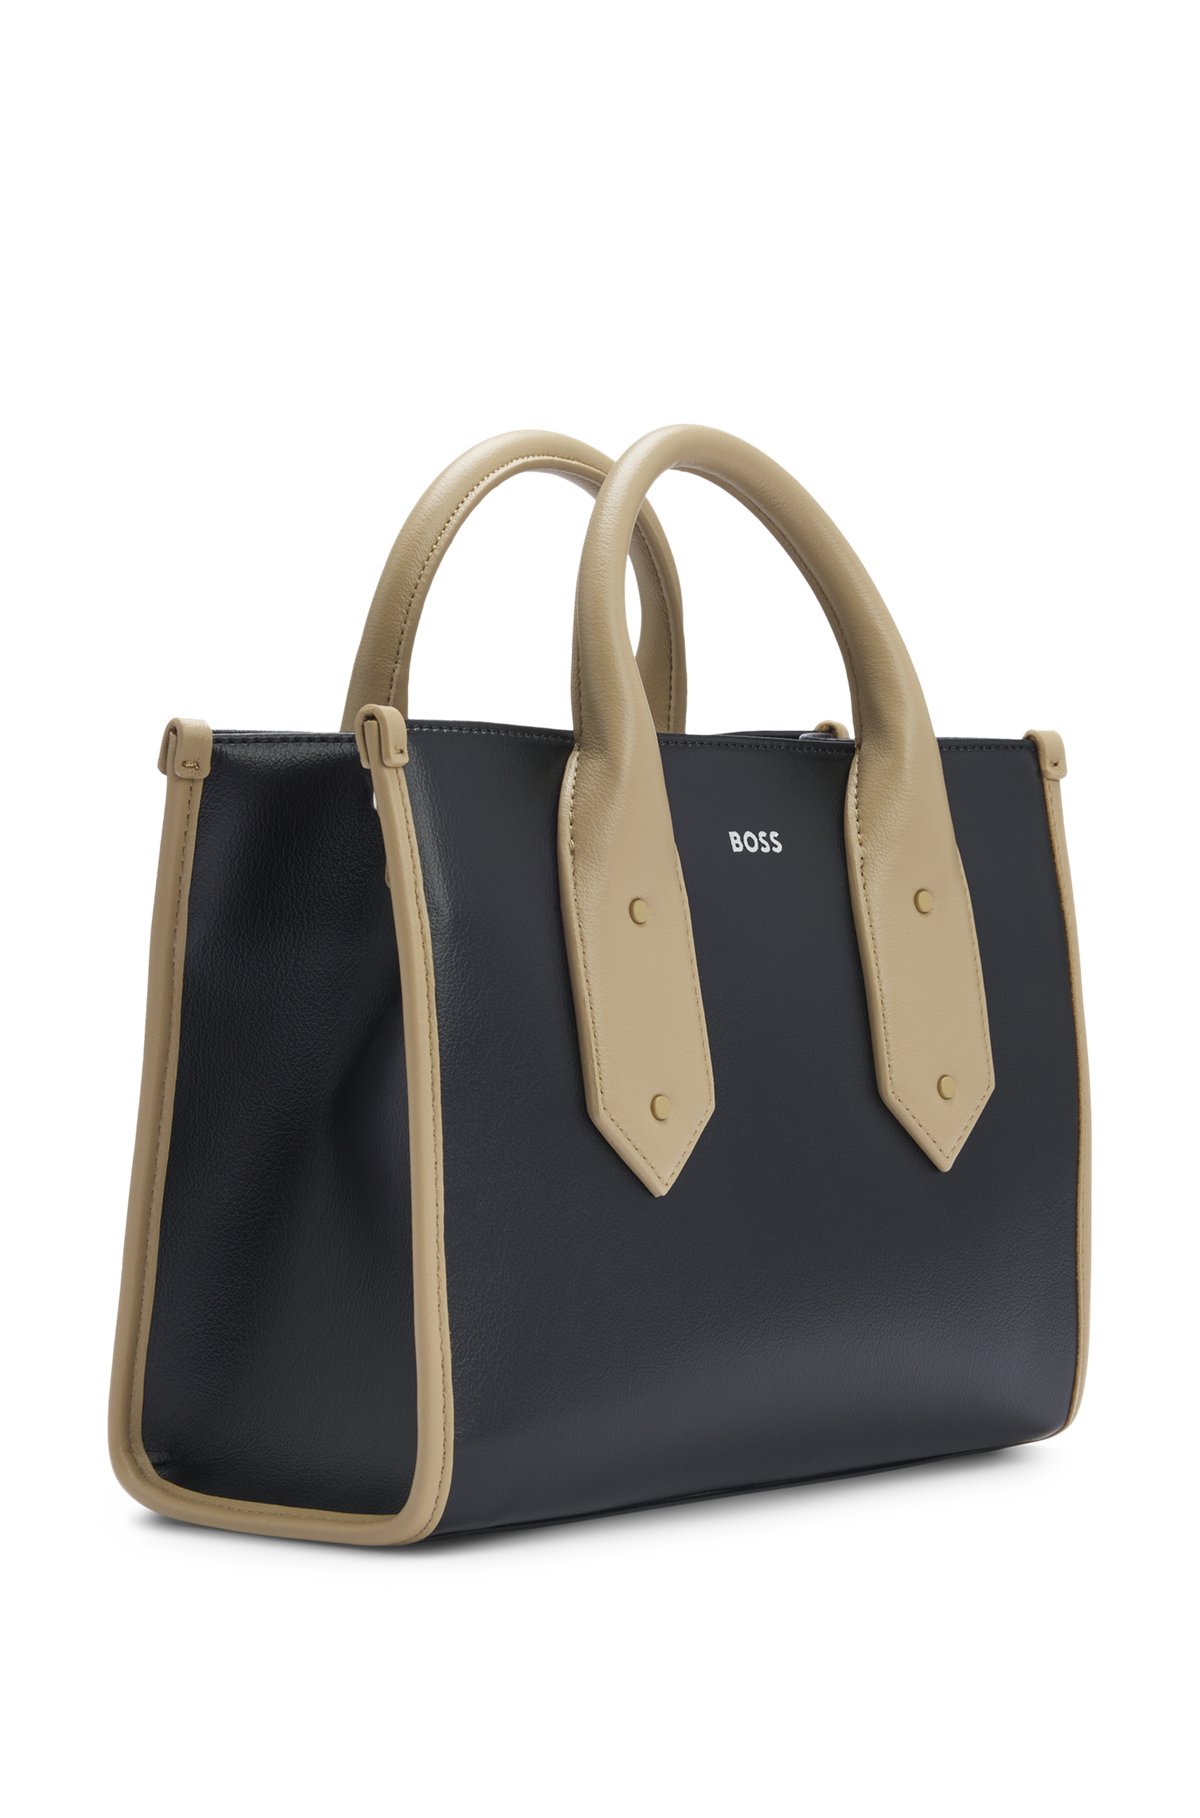 BOSS - Two-tone faux-leather tote bag with signature details